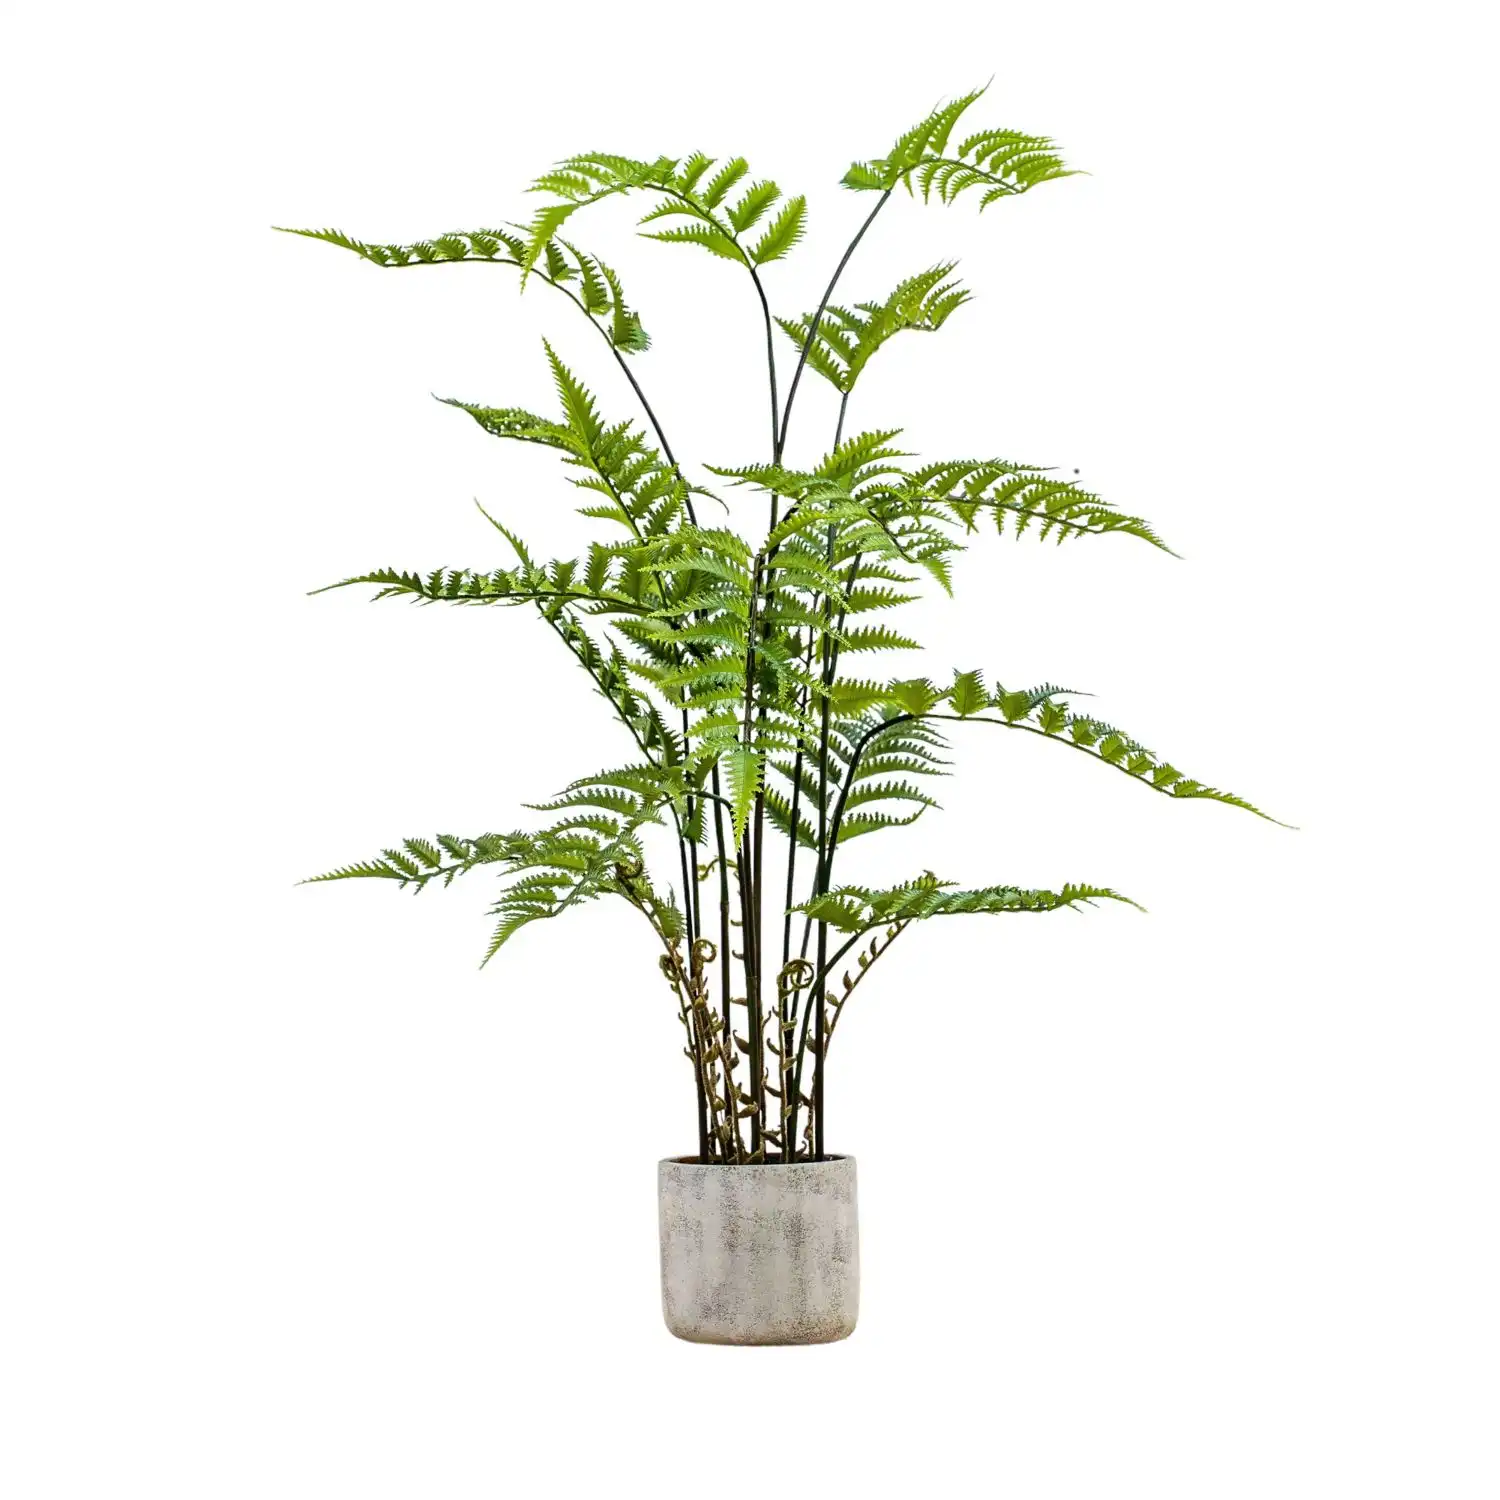 Cream Green Potted Fern in Cement Pot Large